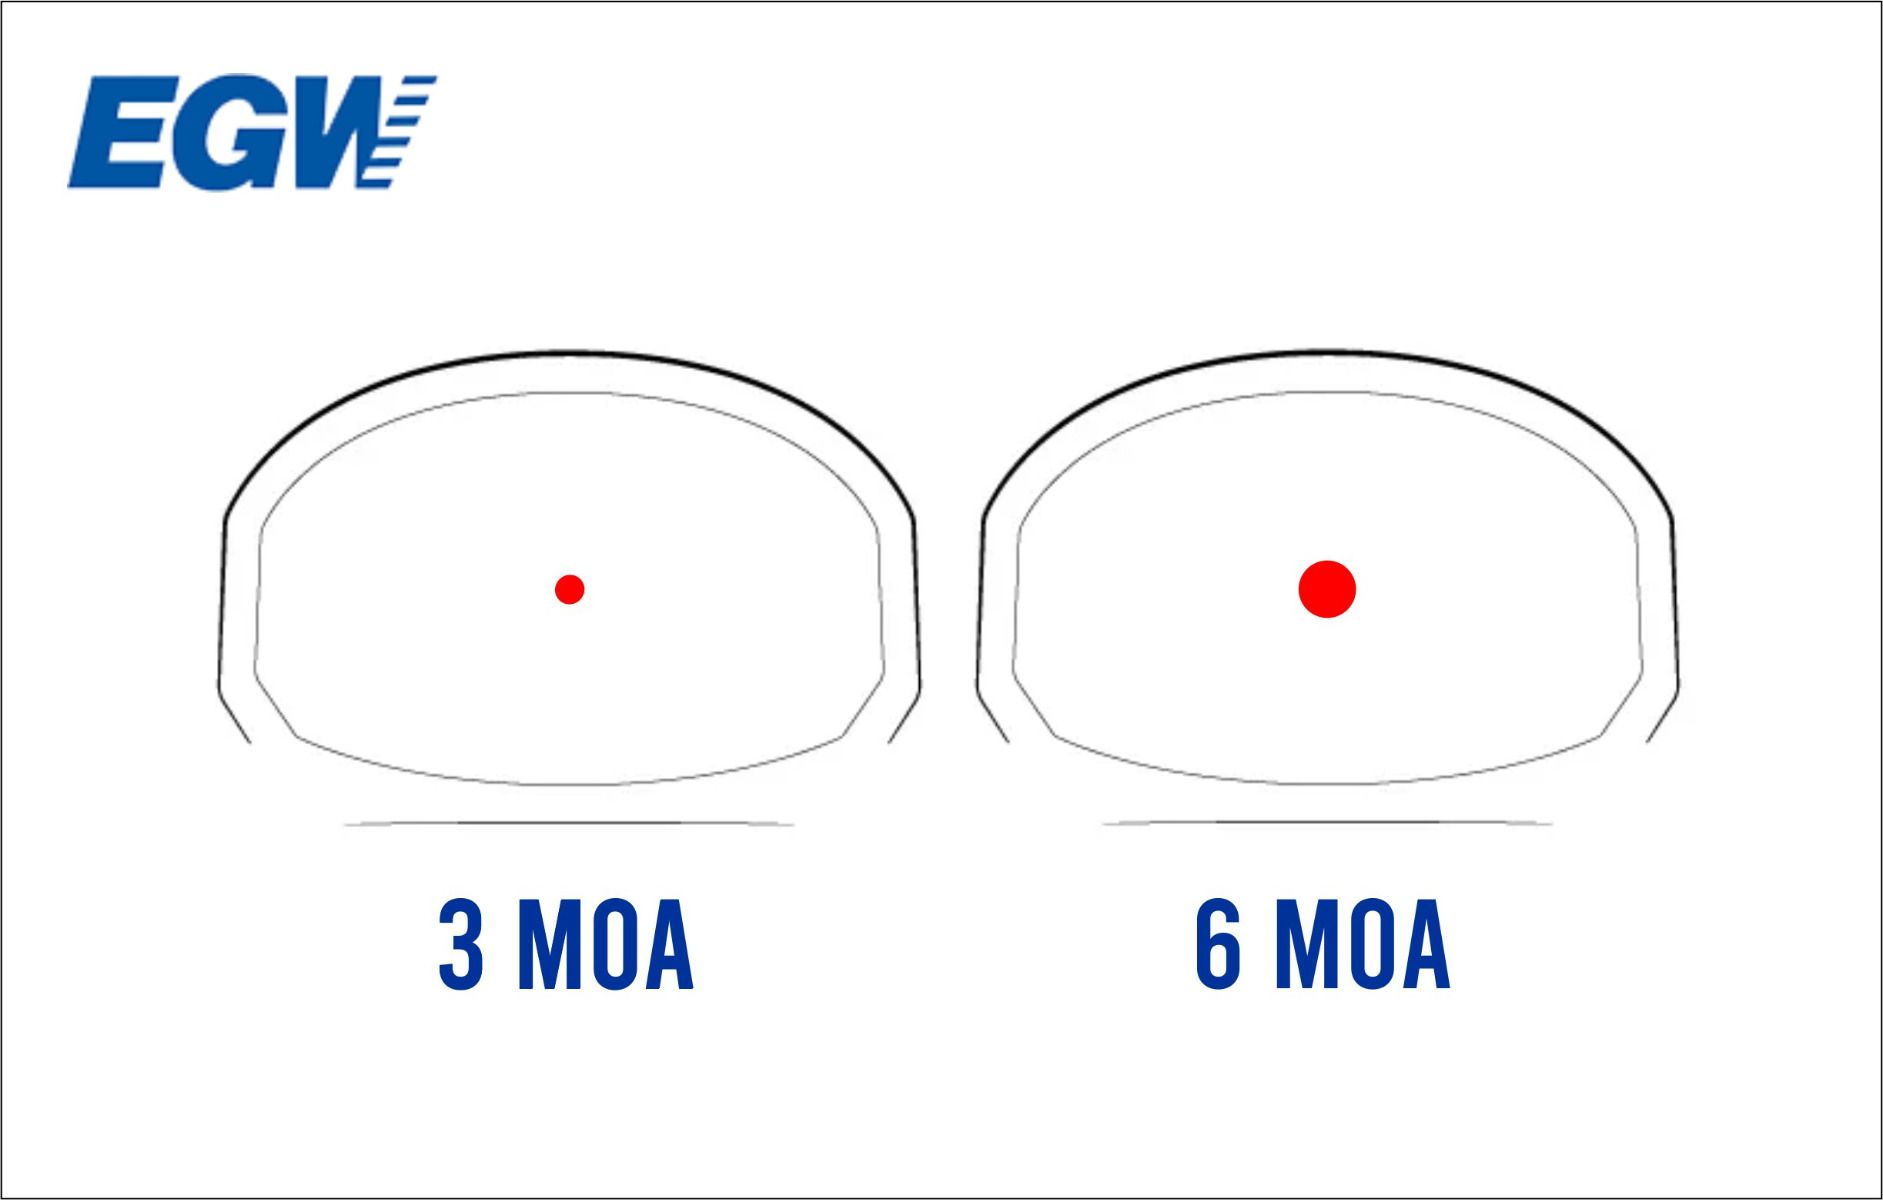 Difference between 3 MOA and 6 MOA dots